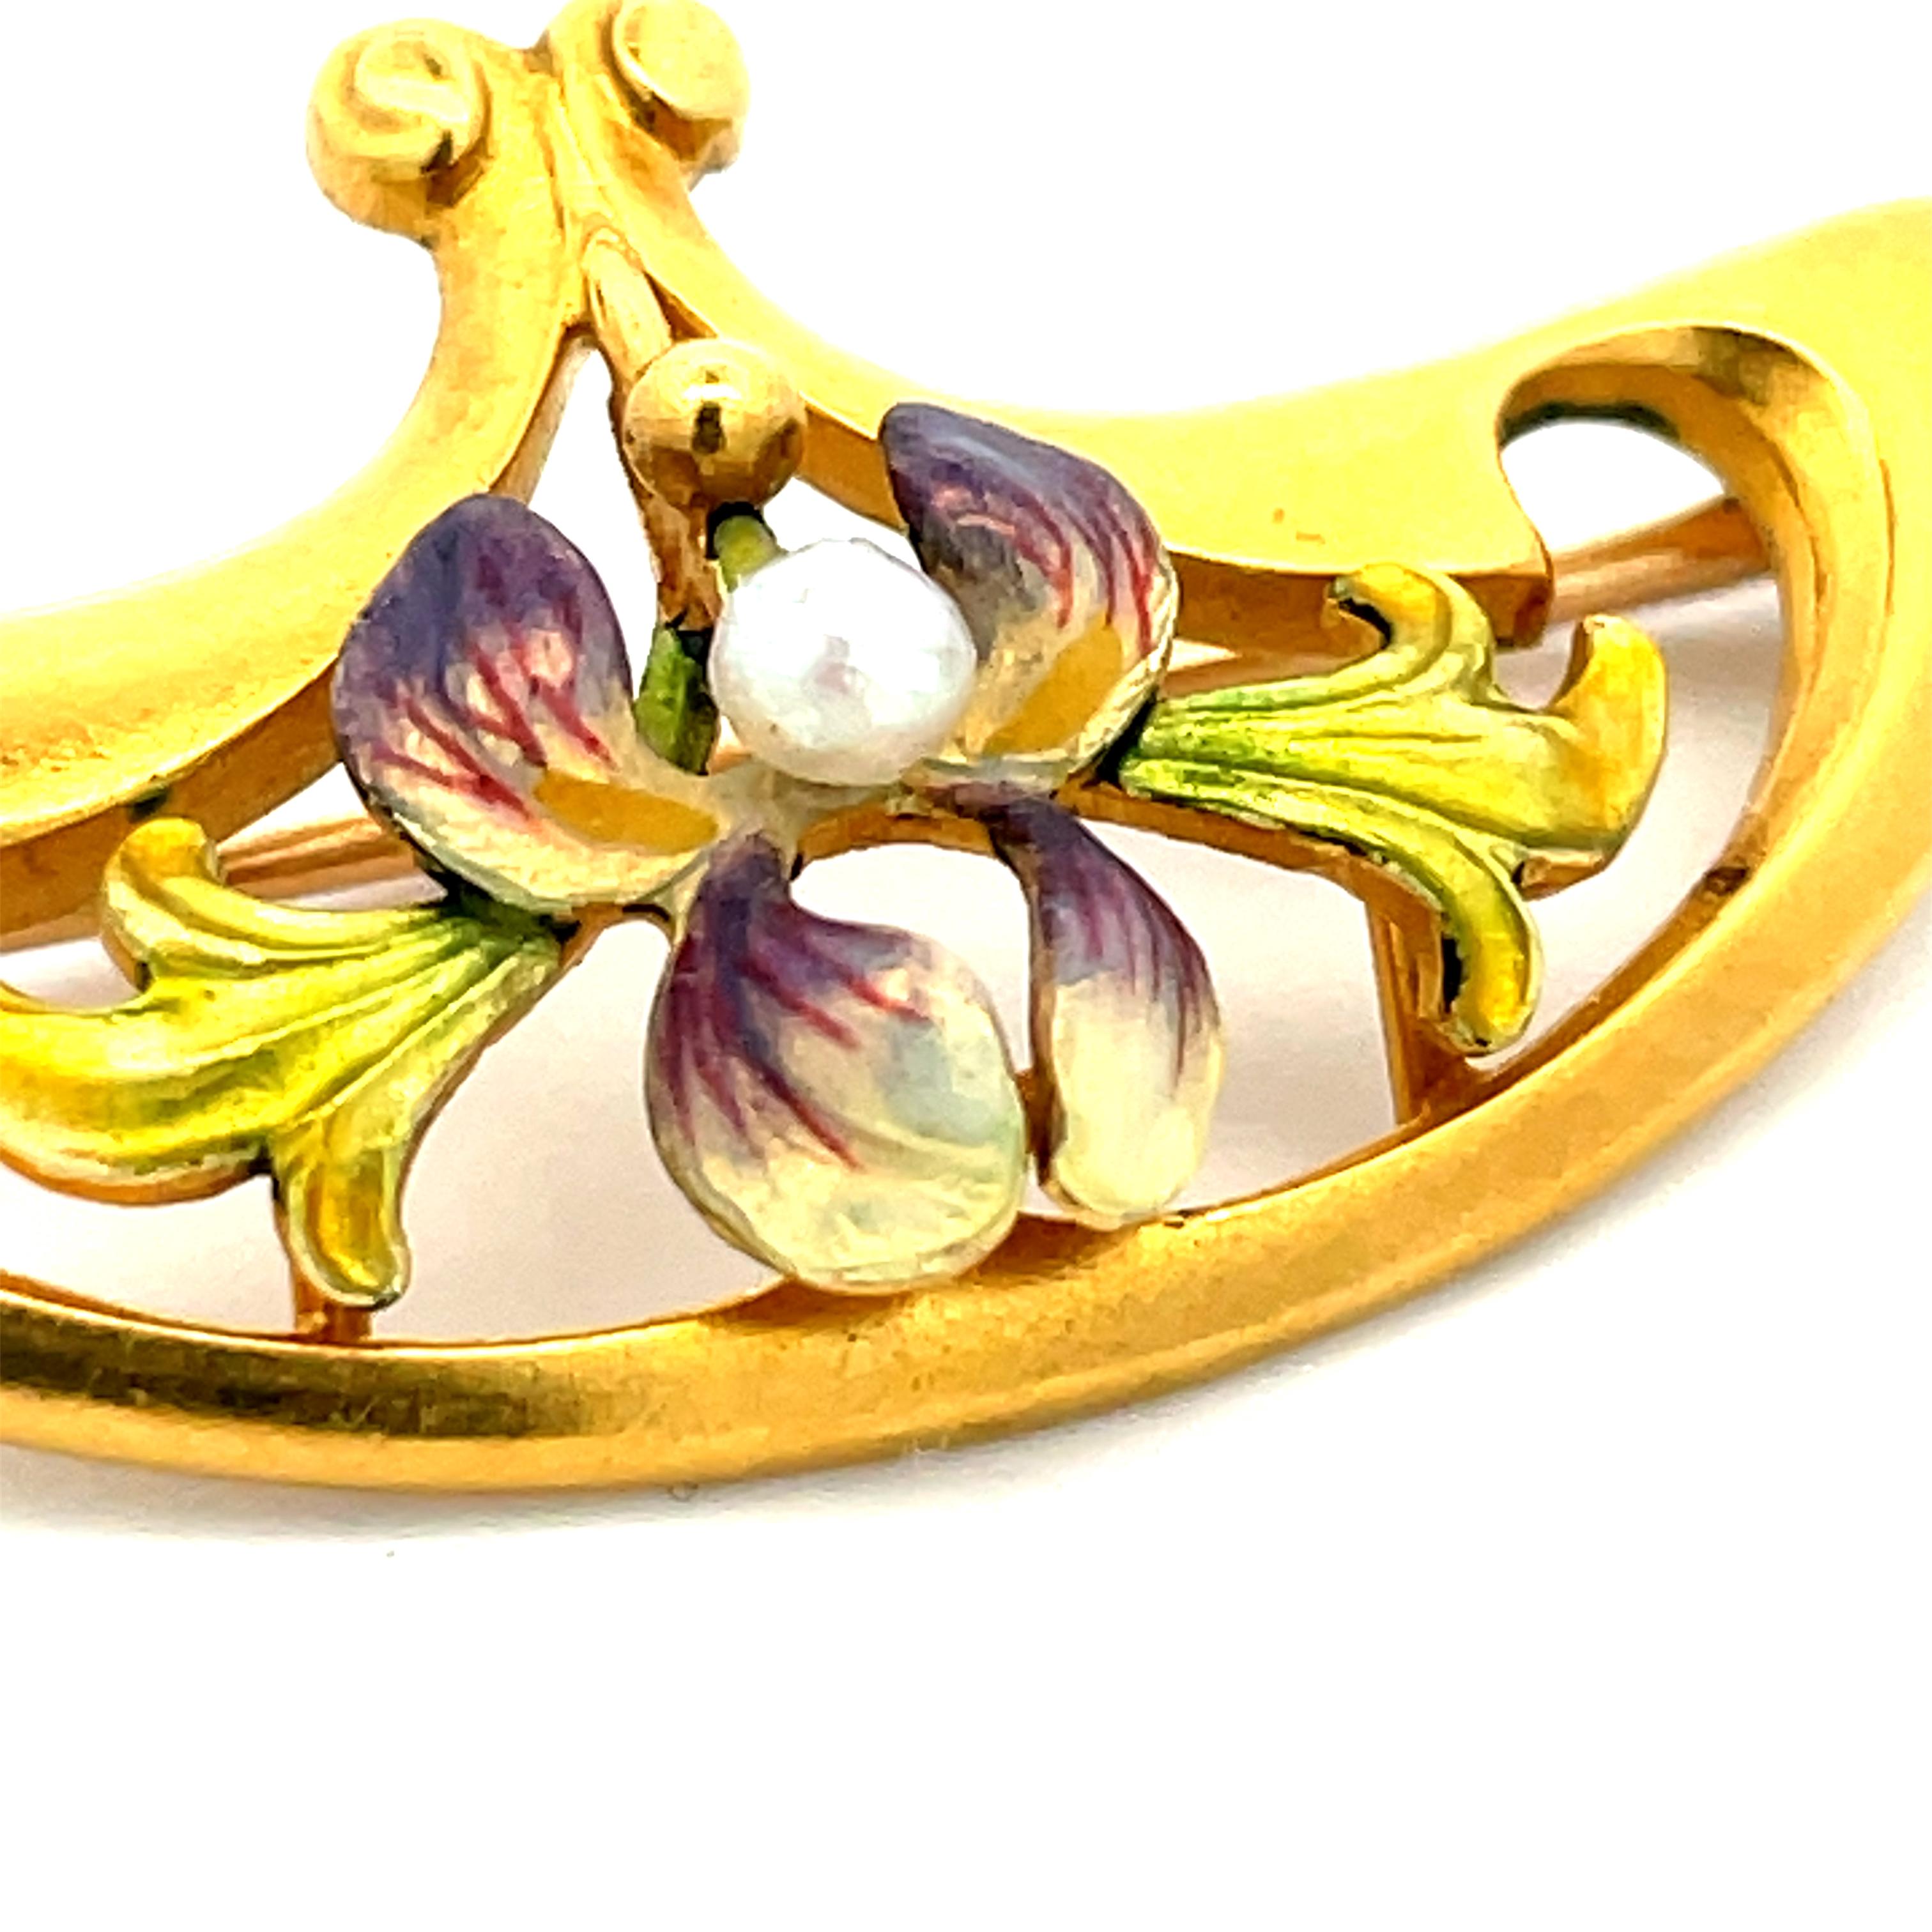 - 14k Yellow Gold 
- Krementz Iris 
- Seed Pearl 
- 1890 Art Nouveau 

This is a stunning Krementz Iris 14k Yellow Gold Pearl Broach from the 1890 Art Nouveau period. The brooch features a classic, time correct, beautiful design that showcases the